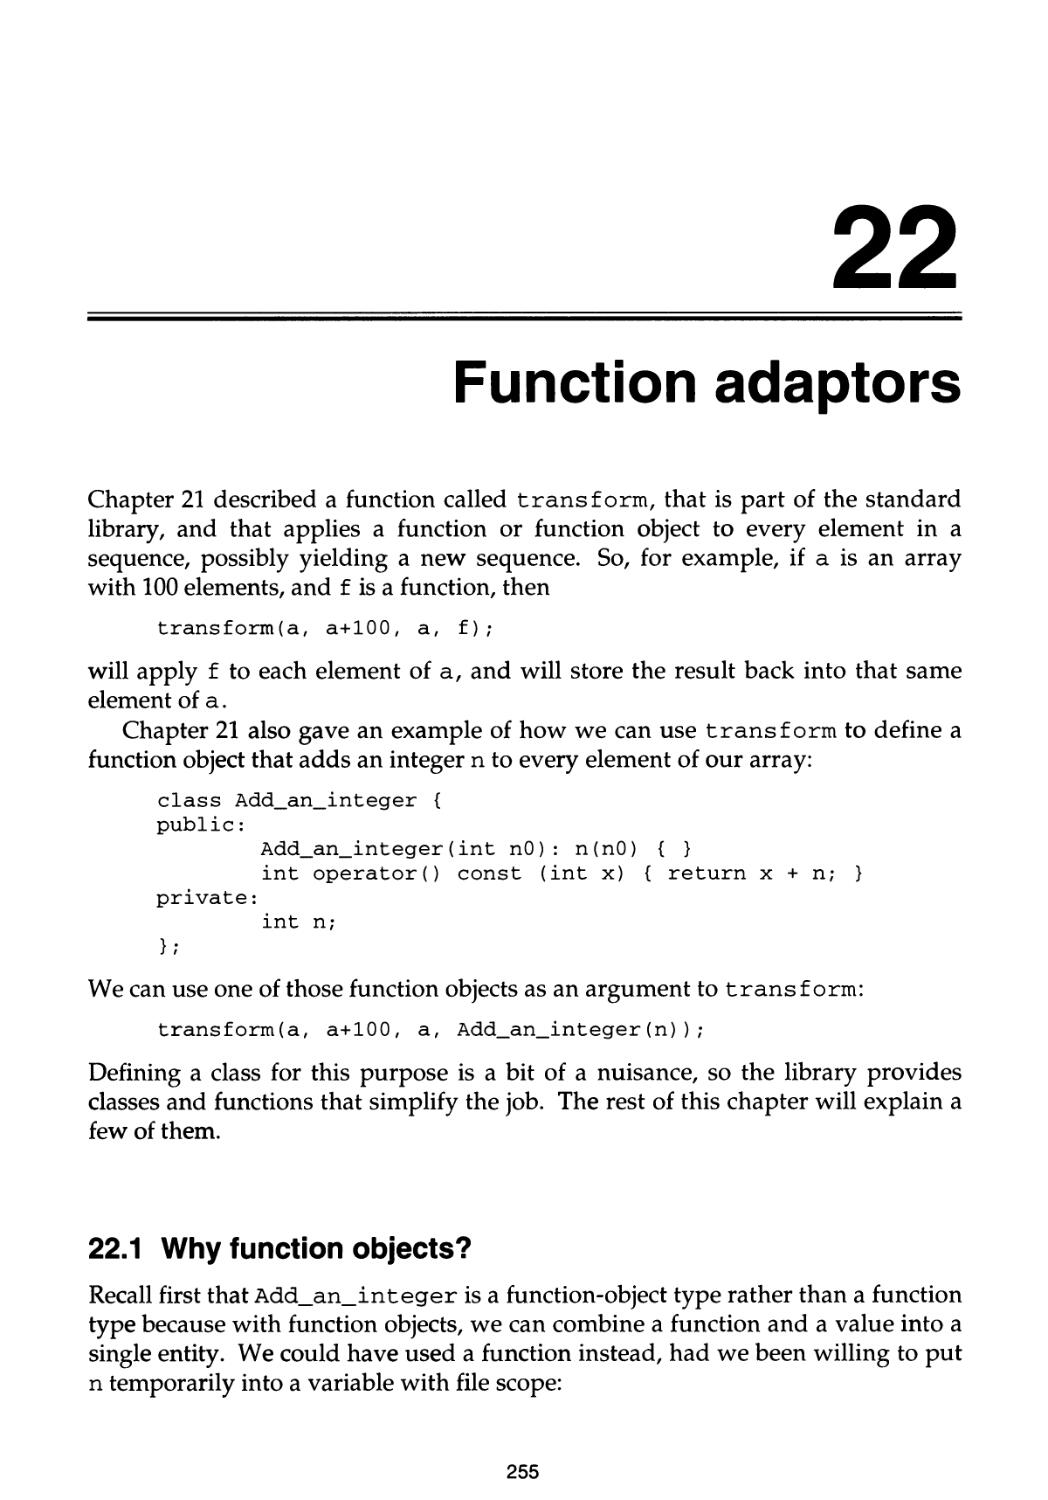 22.2 Function objects for built-in operators